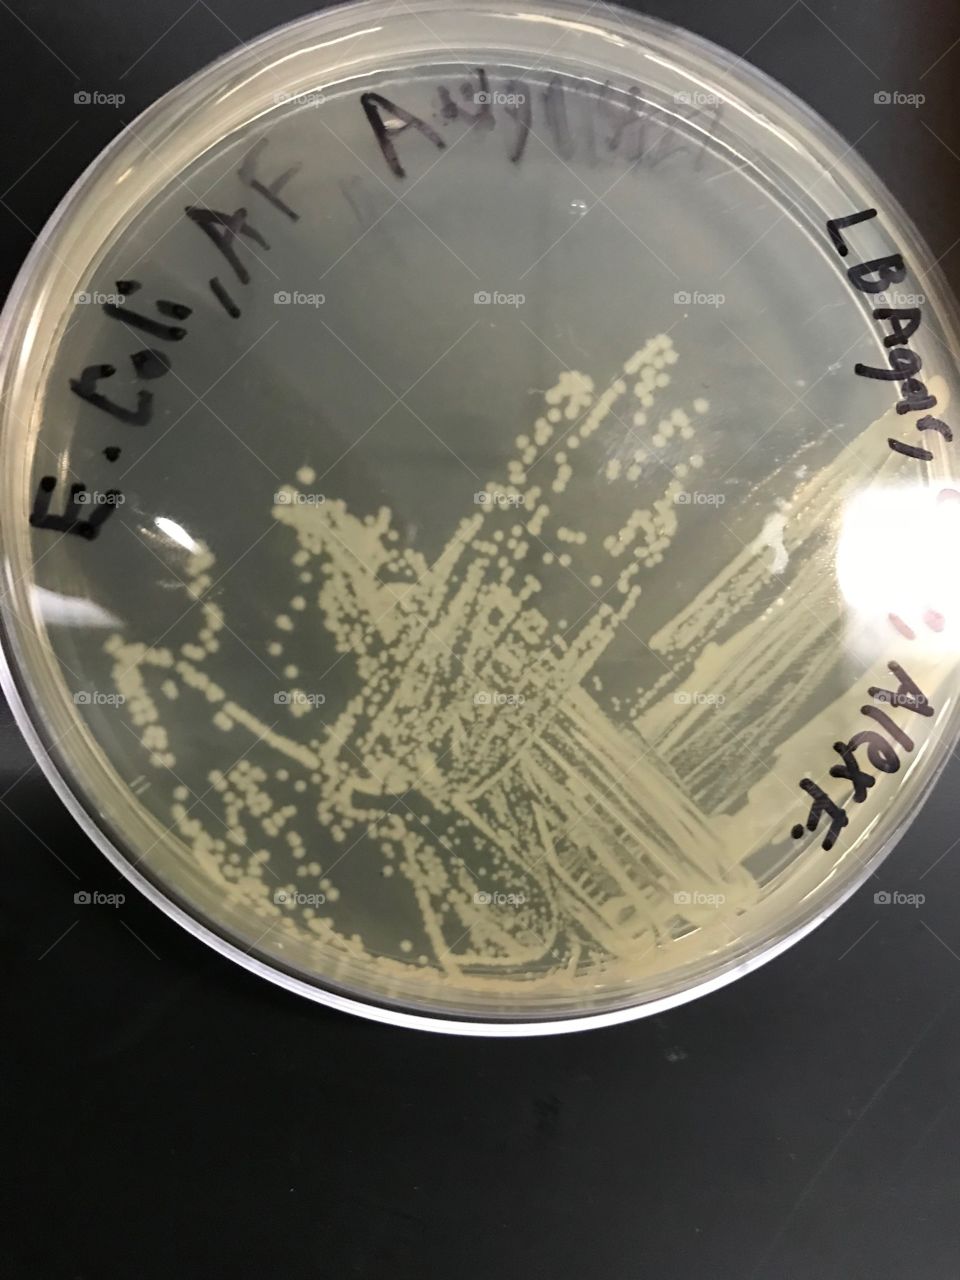 E. coli streaked across LB agar plate that can b observed in separate isolated colonies- the single dots are the colonies.